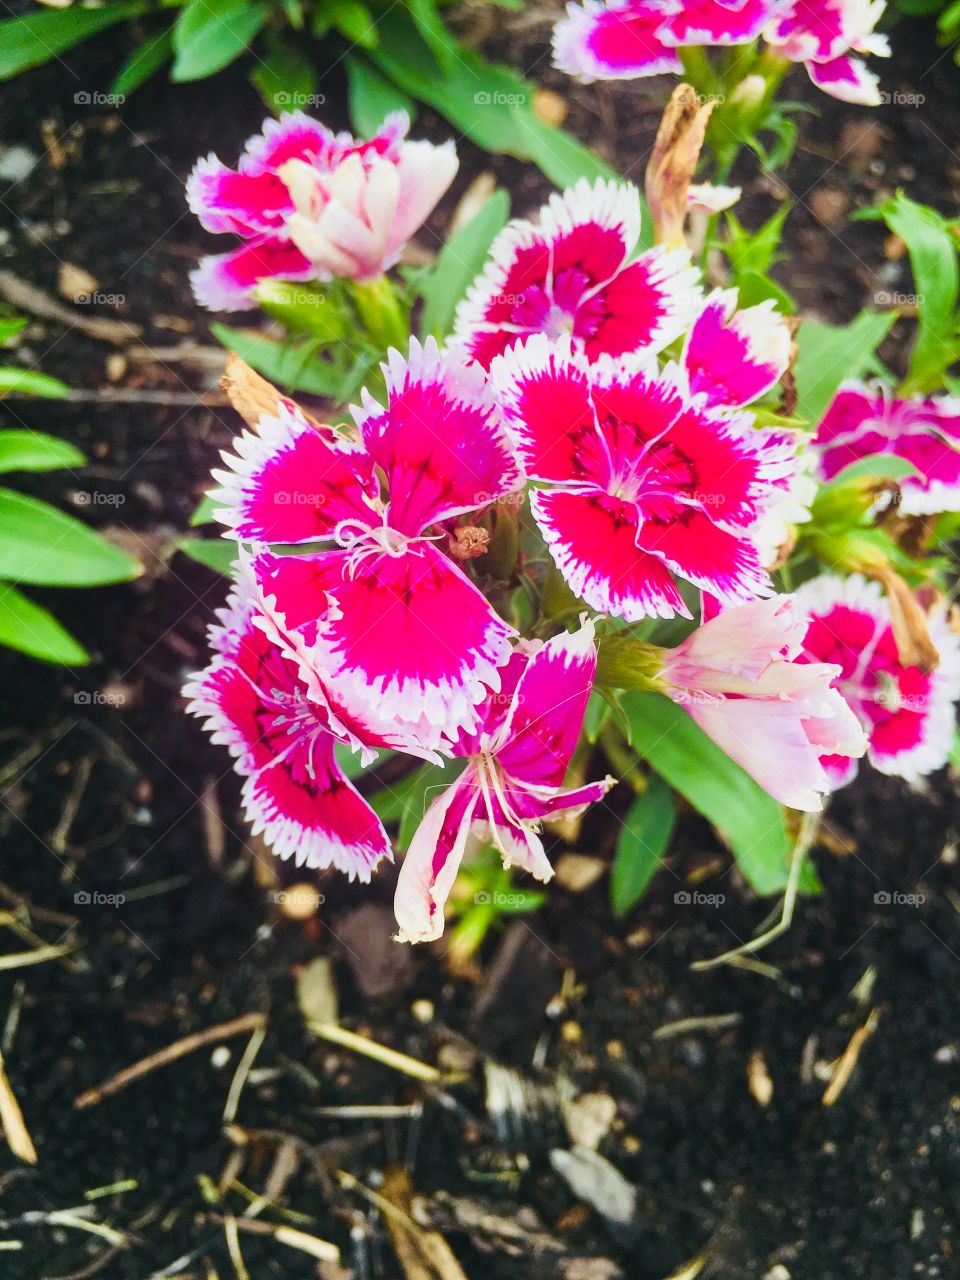 Tiny neon pink and white flowers